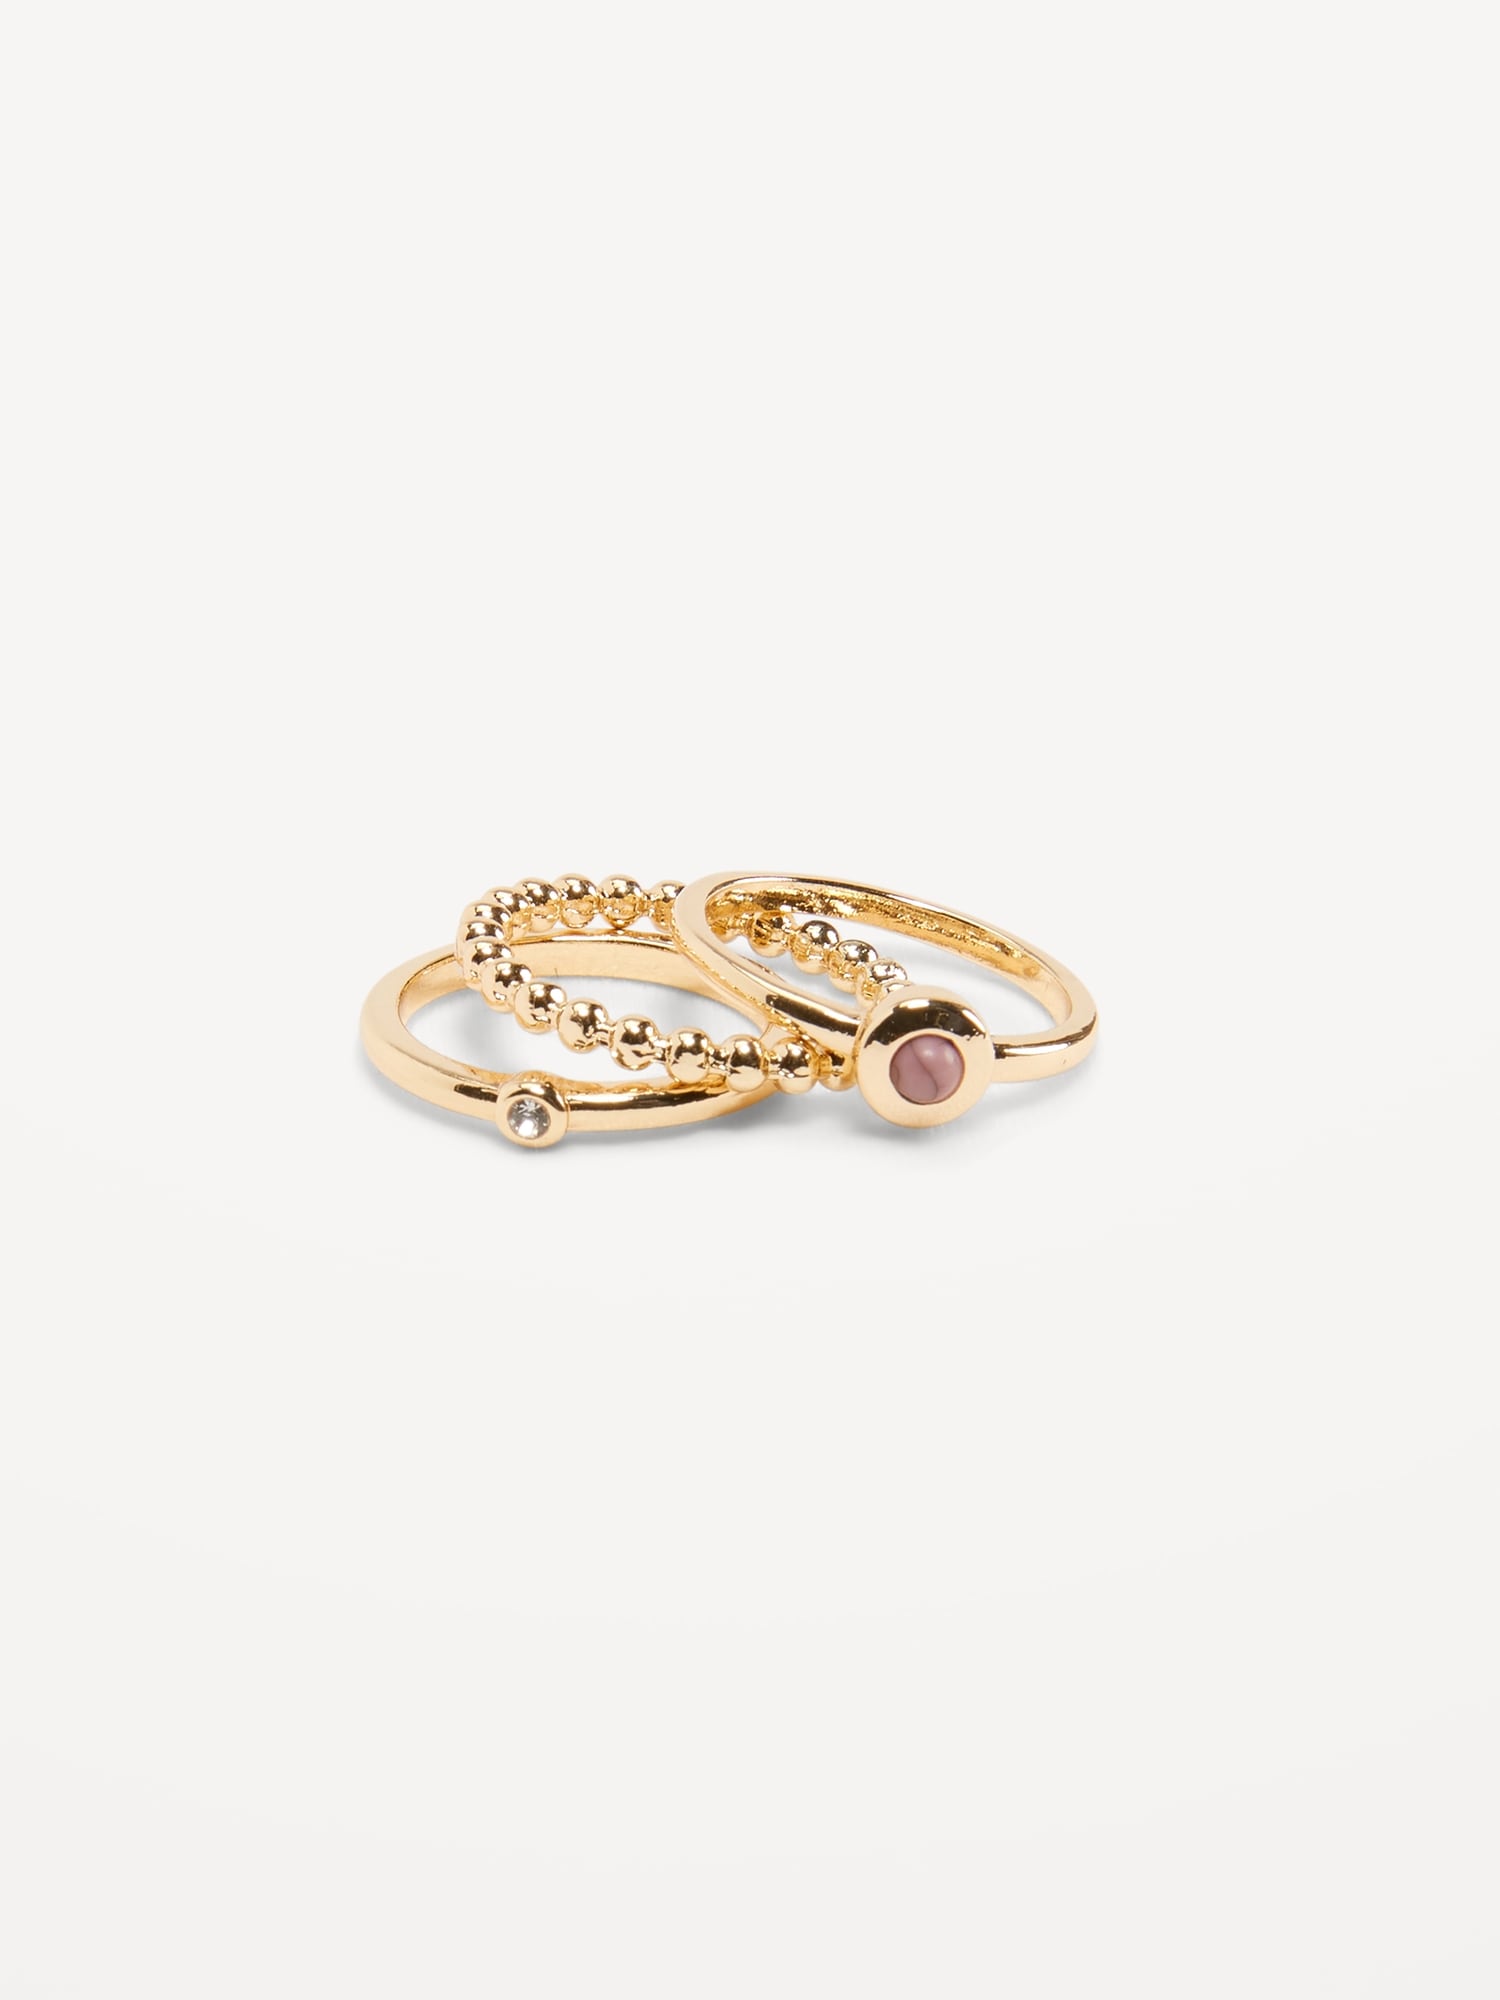 Gold-Plated Ring 3-Pack for Women